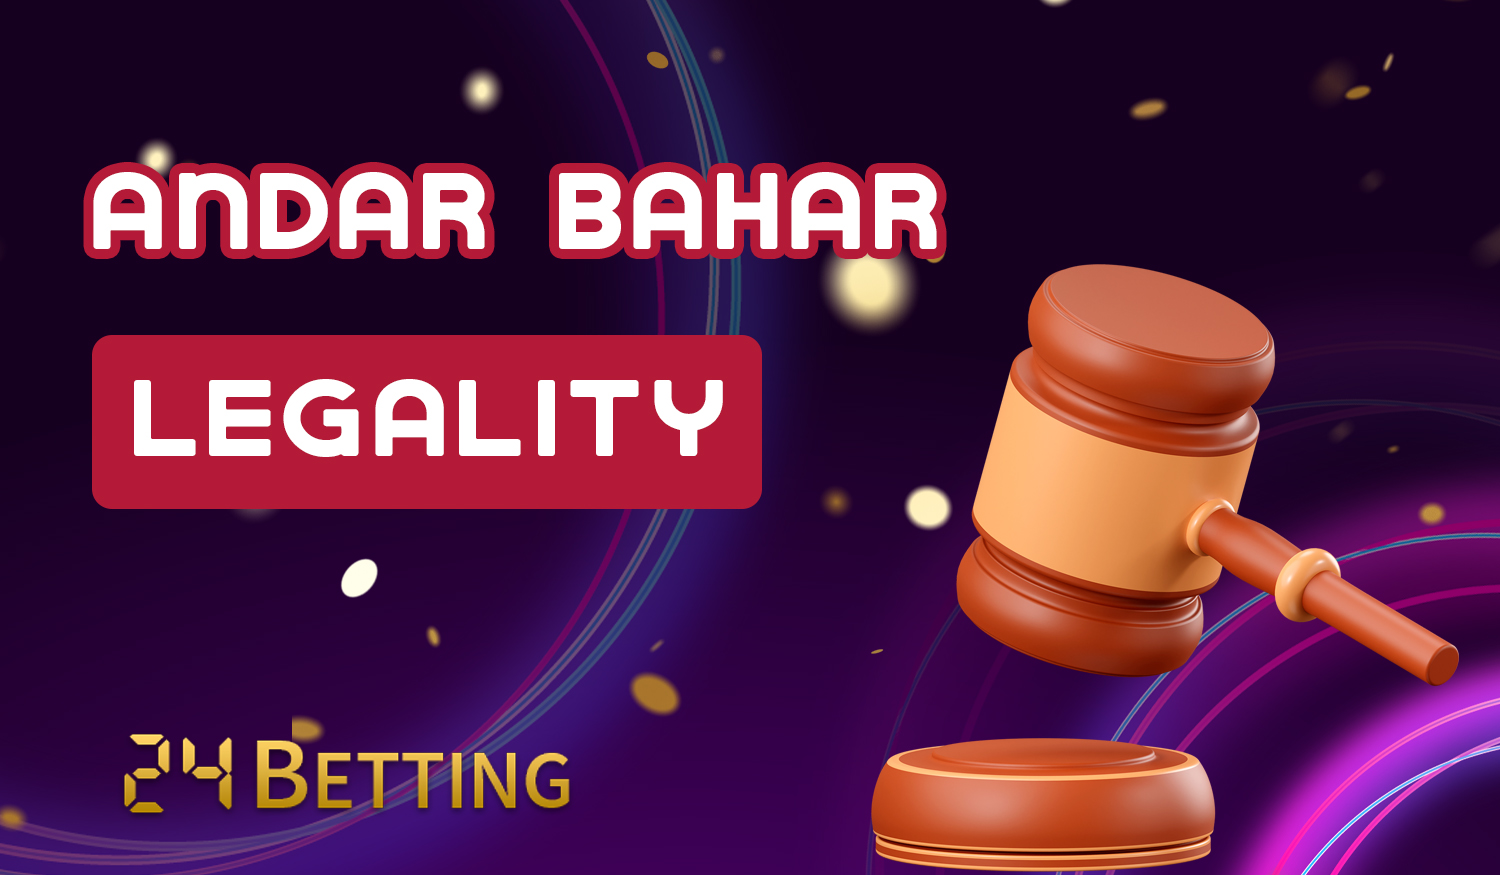 Is it legal for Indian users to play Andar bahar at 24betting